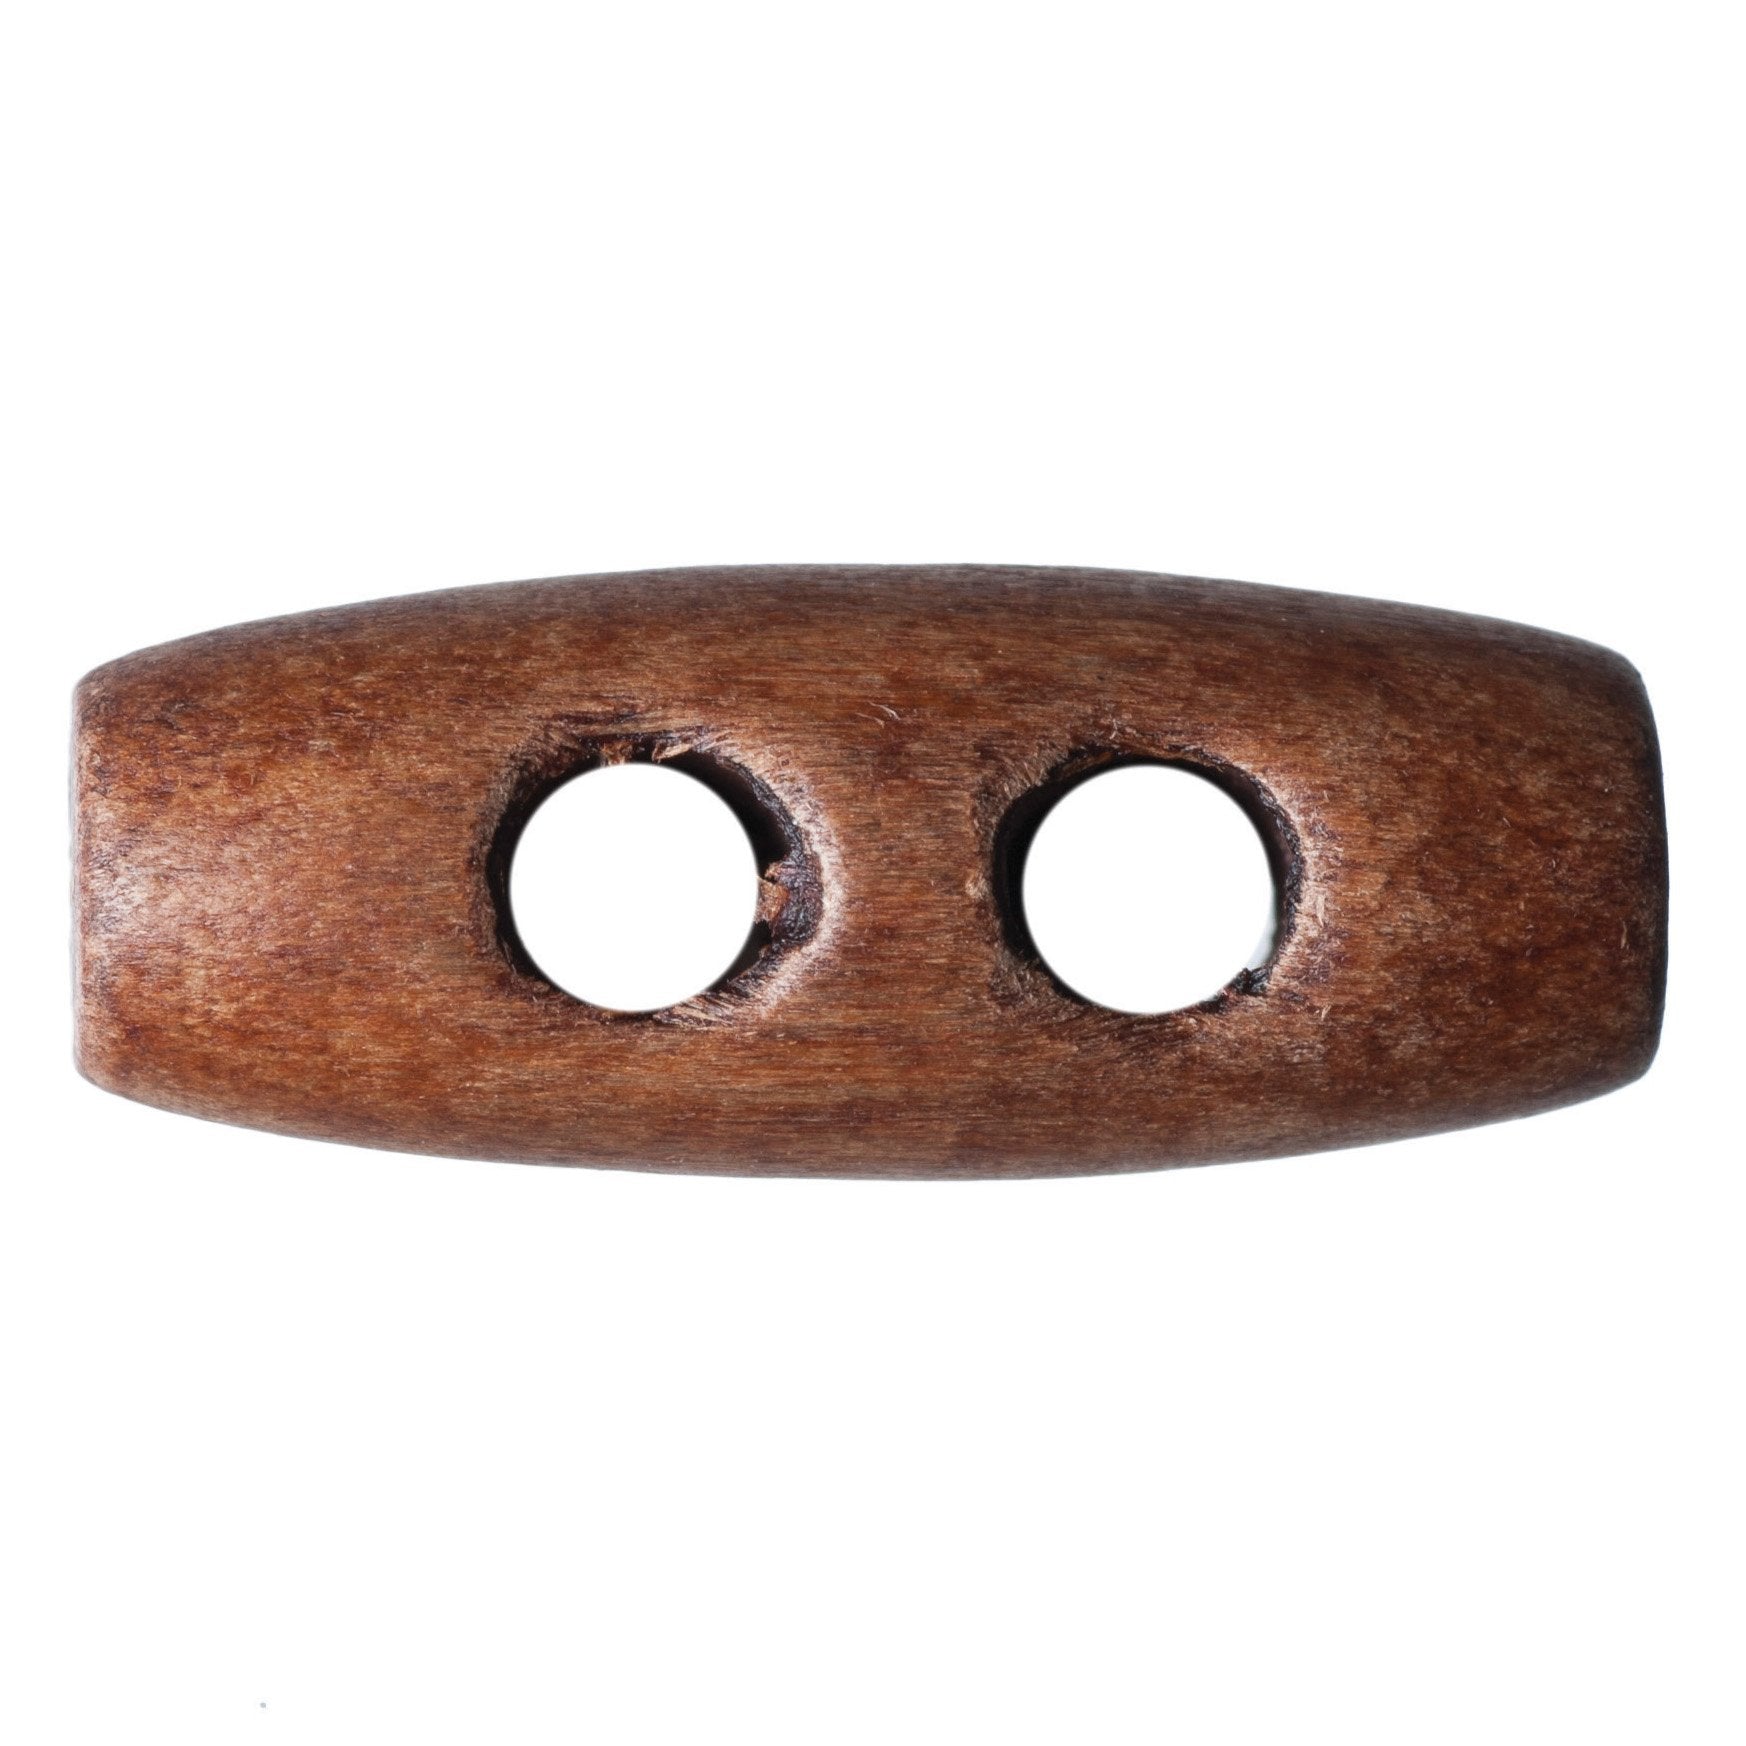 Wooden Toggle Button #03 from Jaycotts Sewing Supplies